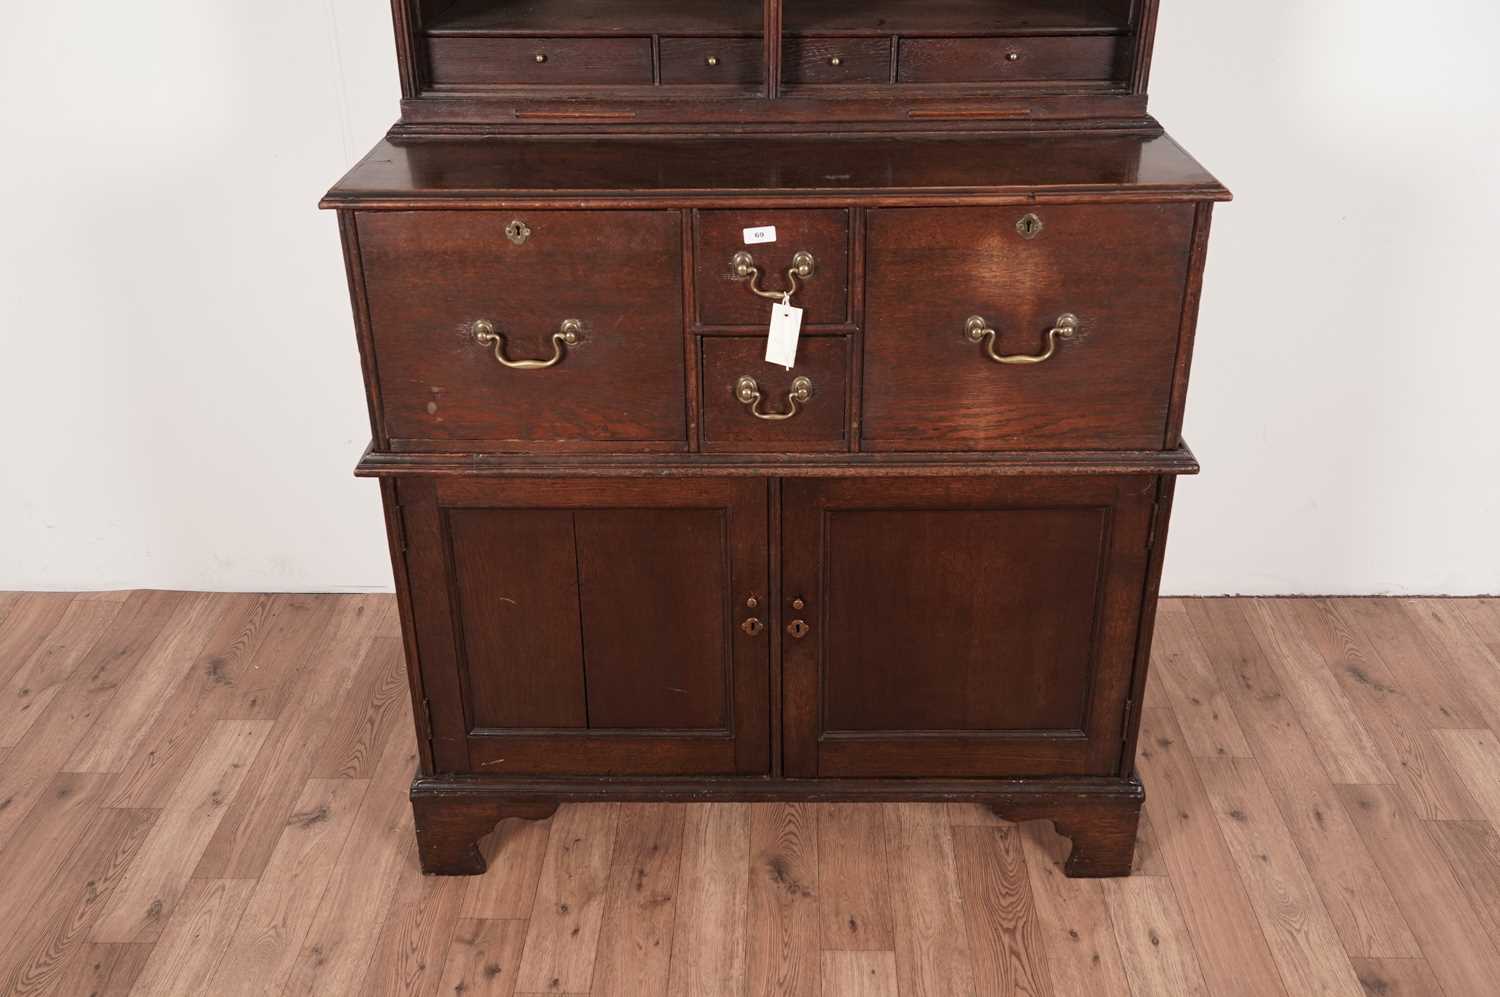 A Georgian style oak double dome bookcase cabinet - Image 6 of 6